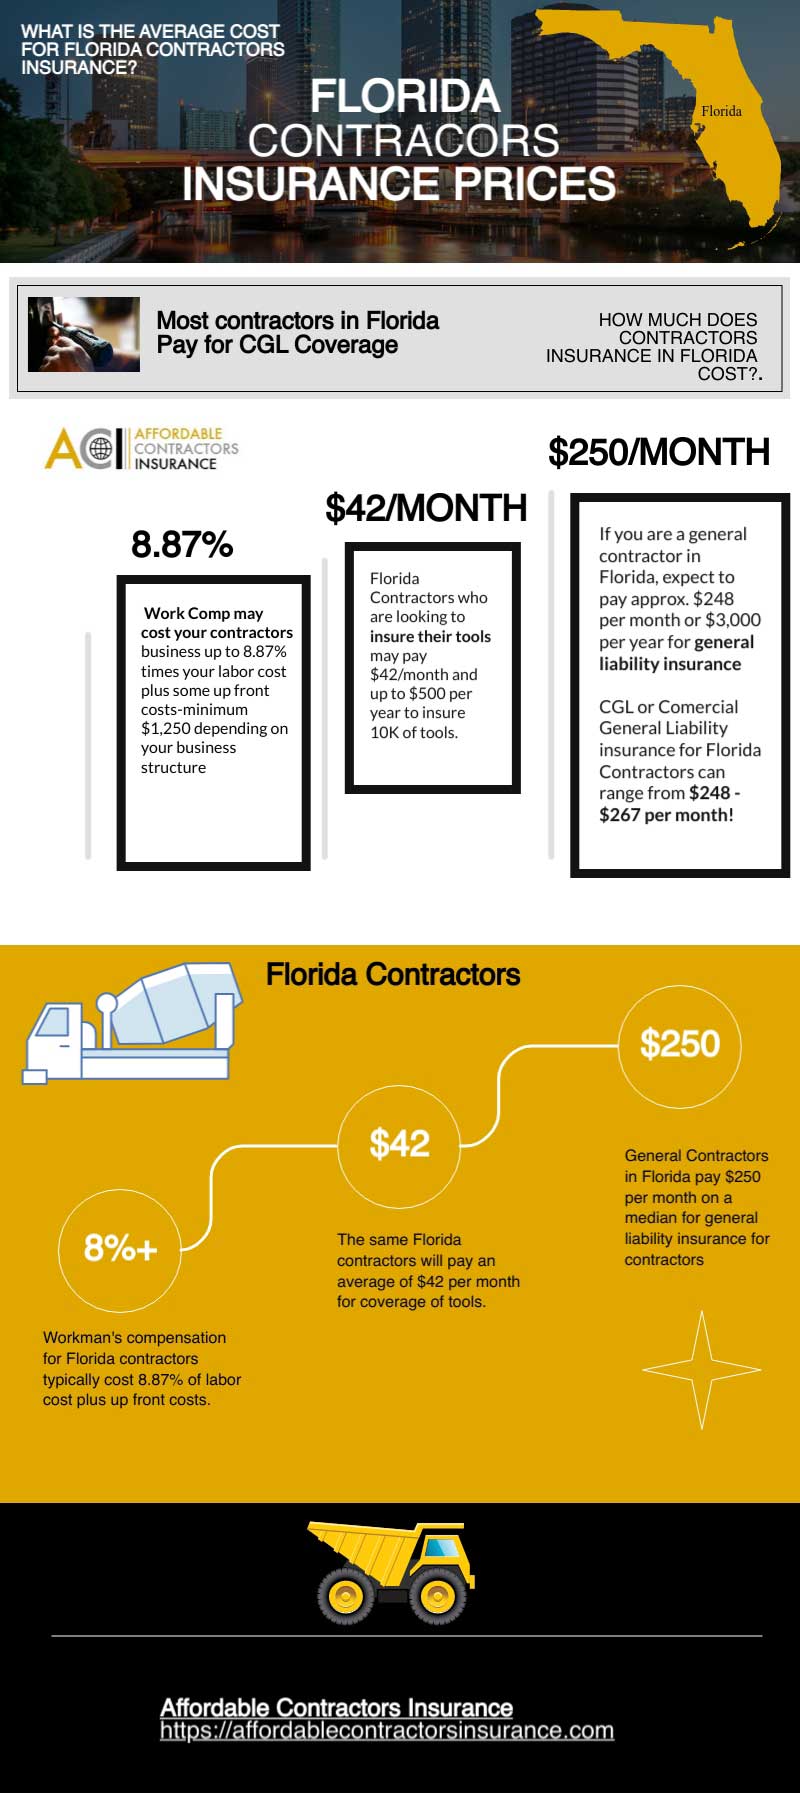 Get the prices for contractors insurance in Florida.